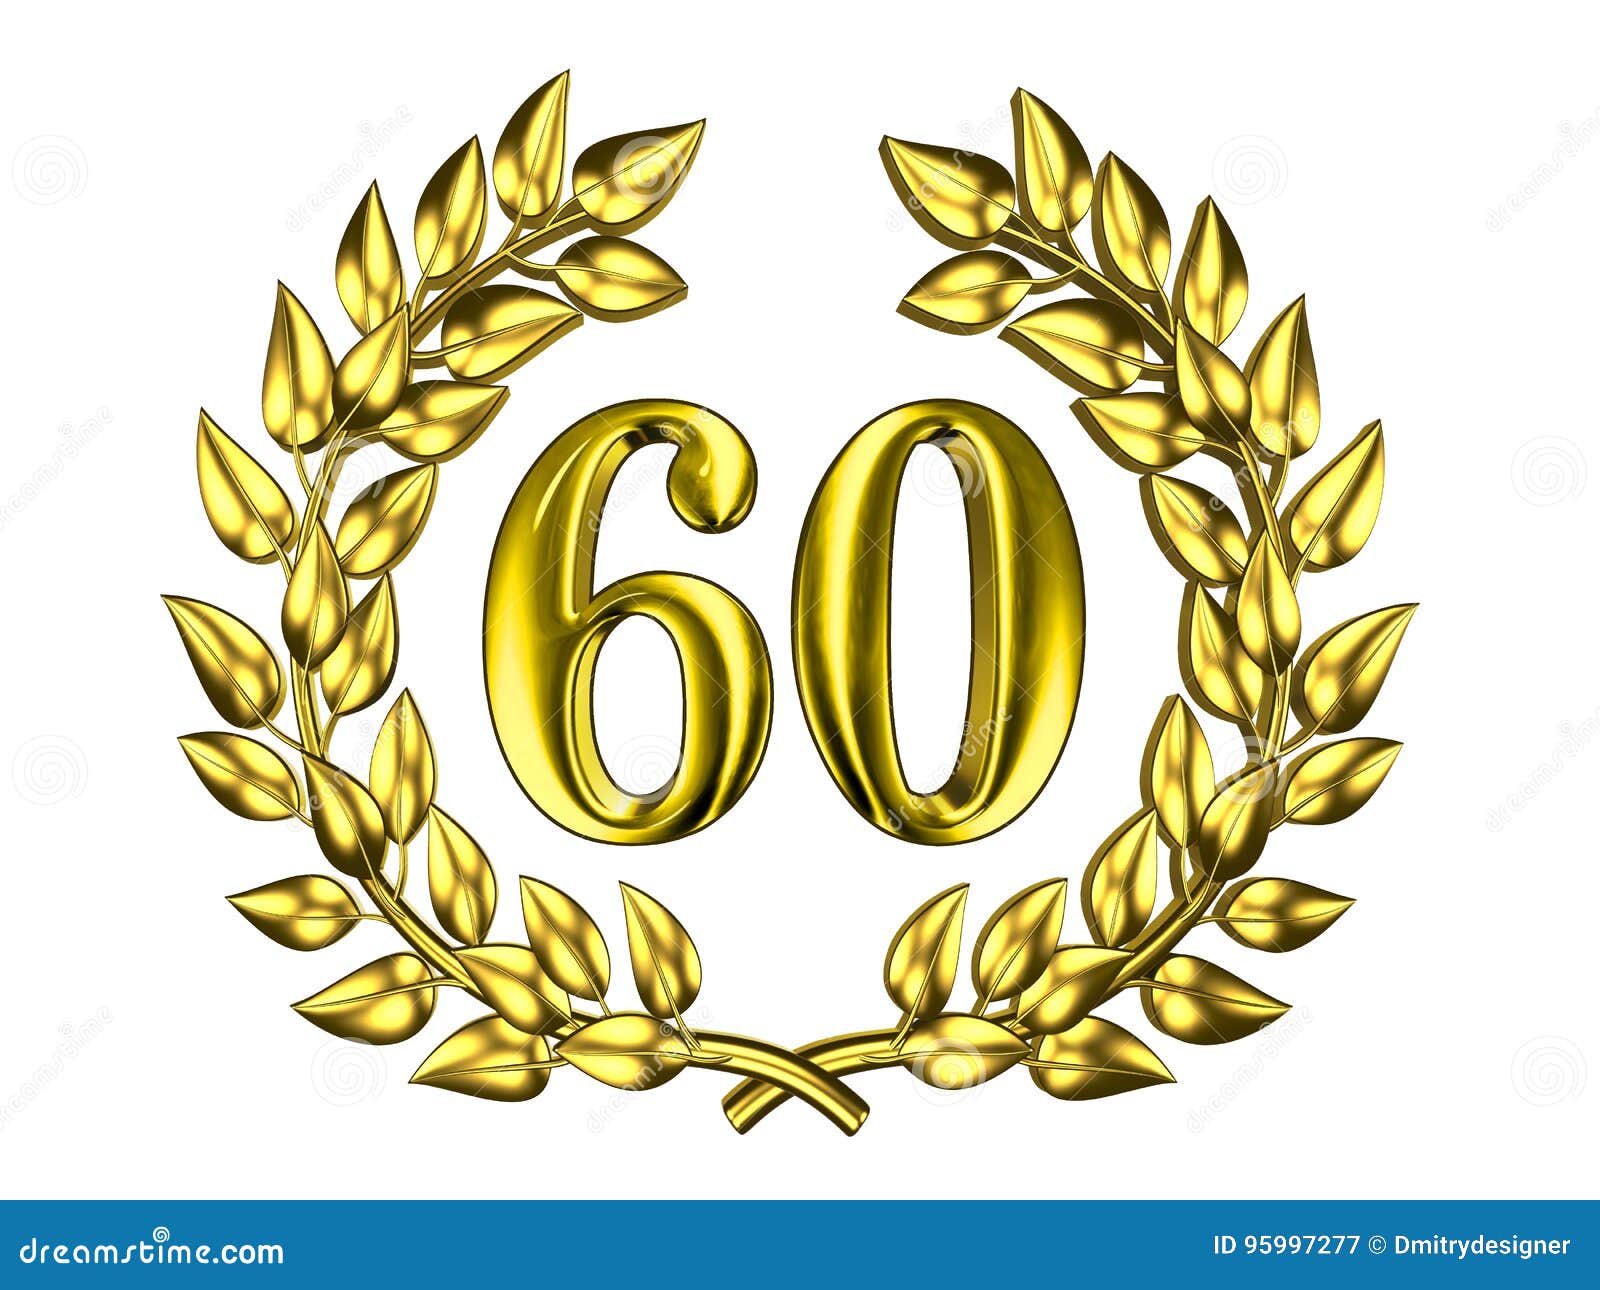 Golden Figure of 60 in a Gold Wreath Stock Illustration